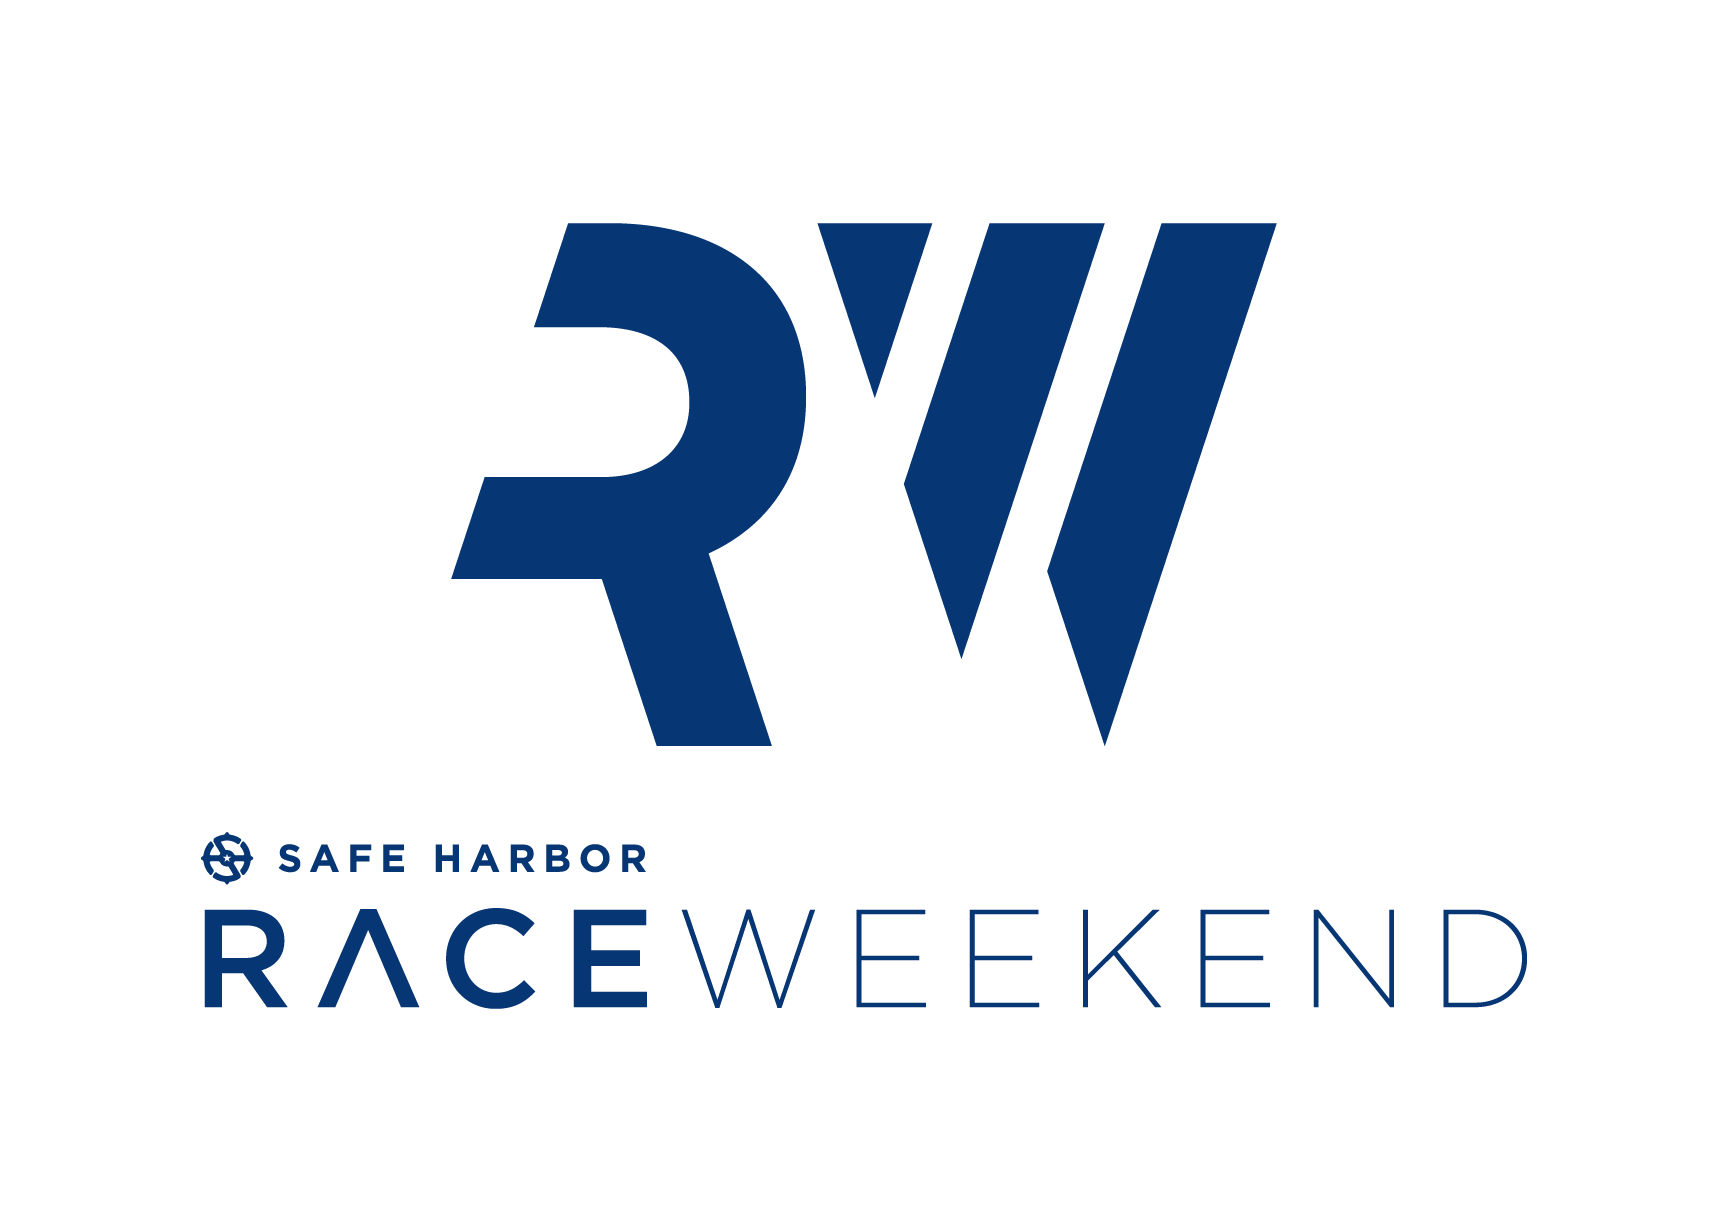 shm-race-weekend-primary-logo-navy.png